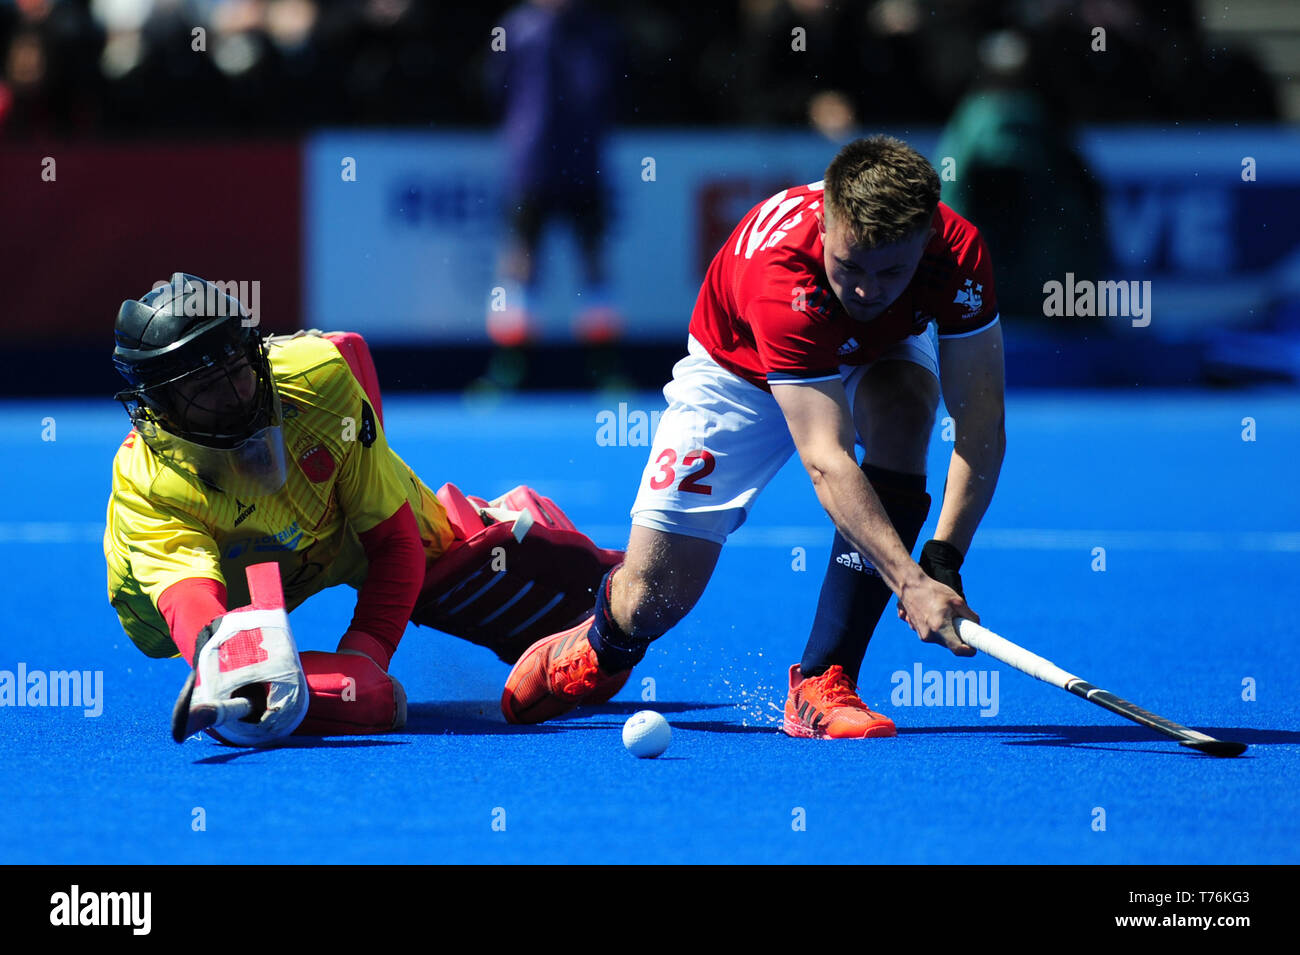 Great Britain's Zachary Wallace (right) takes a penalty shot during the FIH Pro League match at the Lee Valley Hockey and Tennis Centre, London. Stock Photo